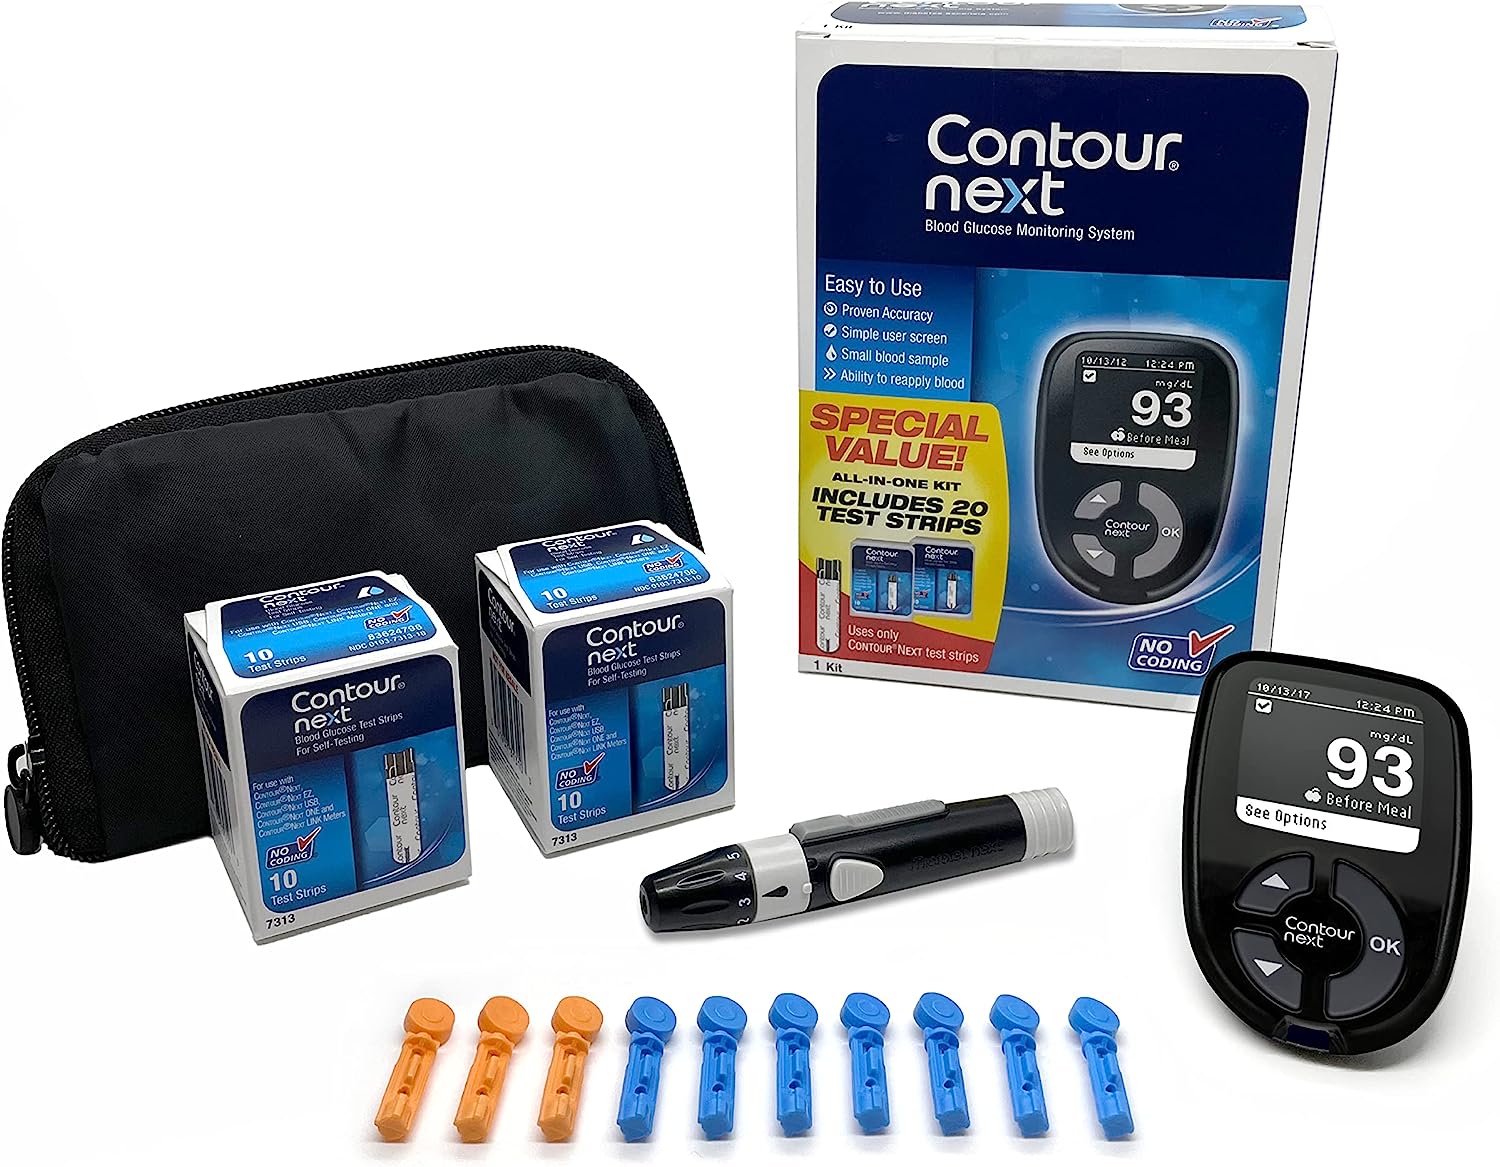 The Contour Next Blood Glucose Monitoring System All- [...]